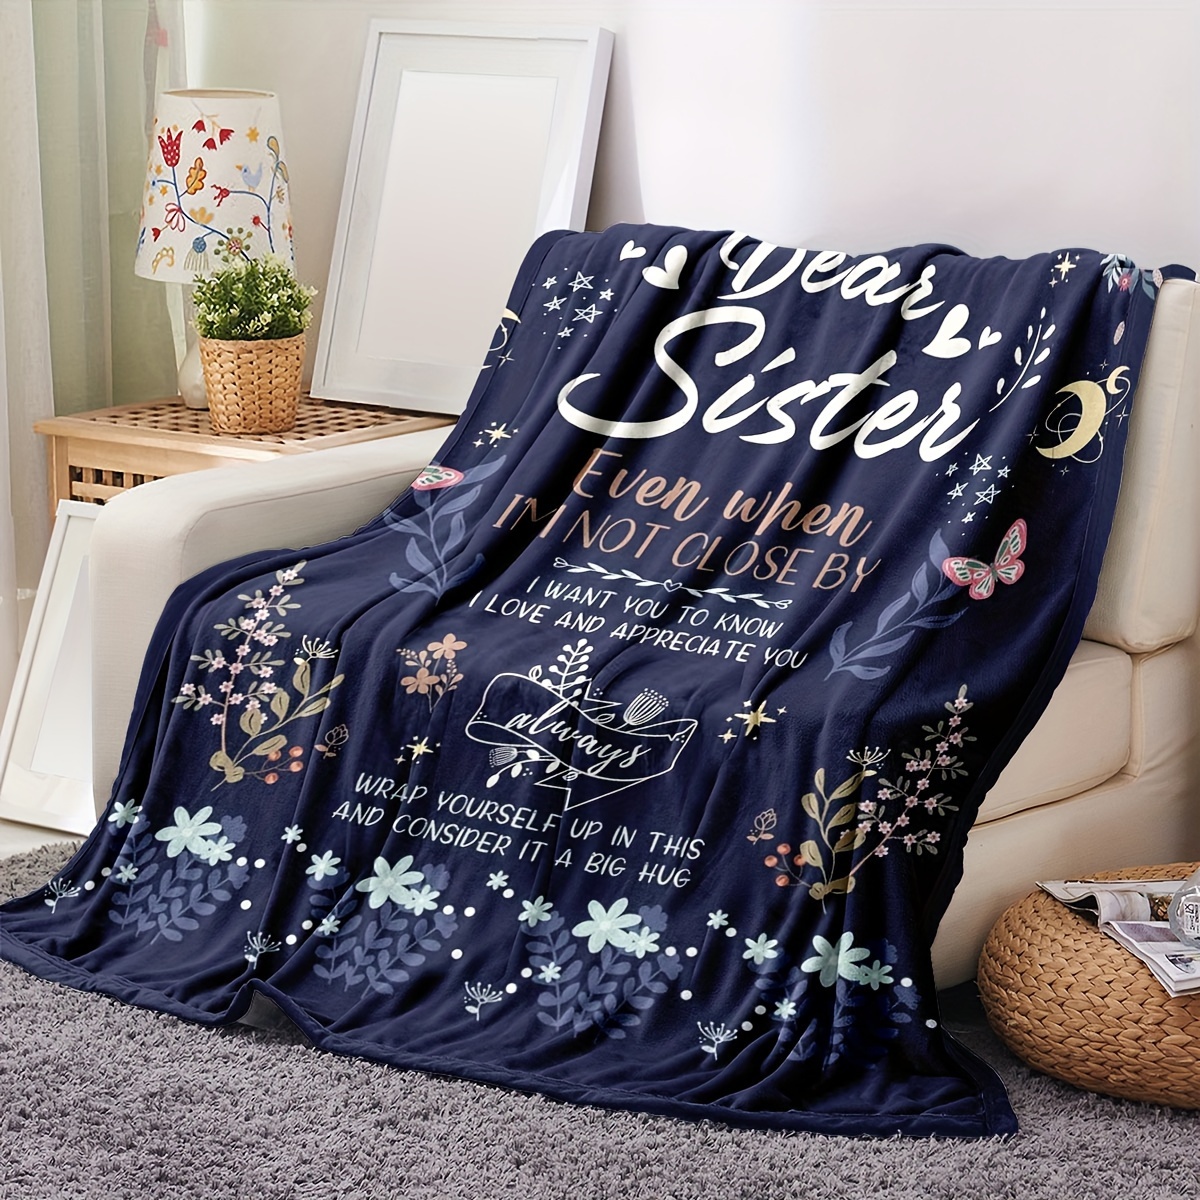 

1pc Sister Gifts From Sister Brother - Anti-ball Soft Throw Blanket For Sisters, Christmas Birthday, Graduation Gift Flannel Blanket For Sister